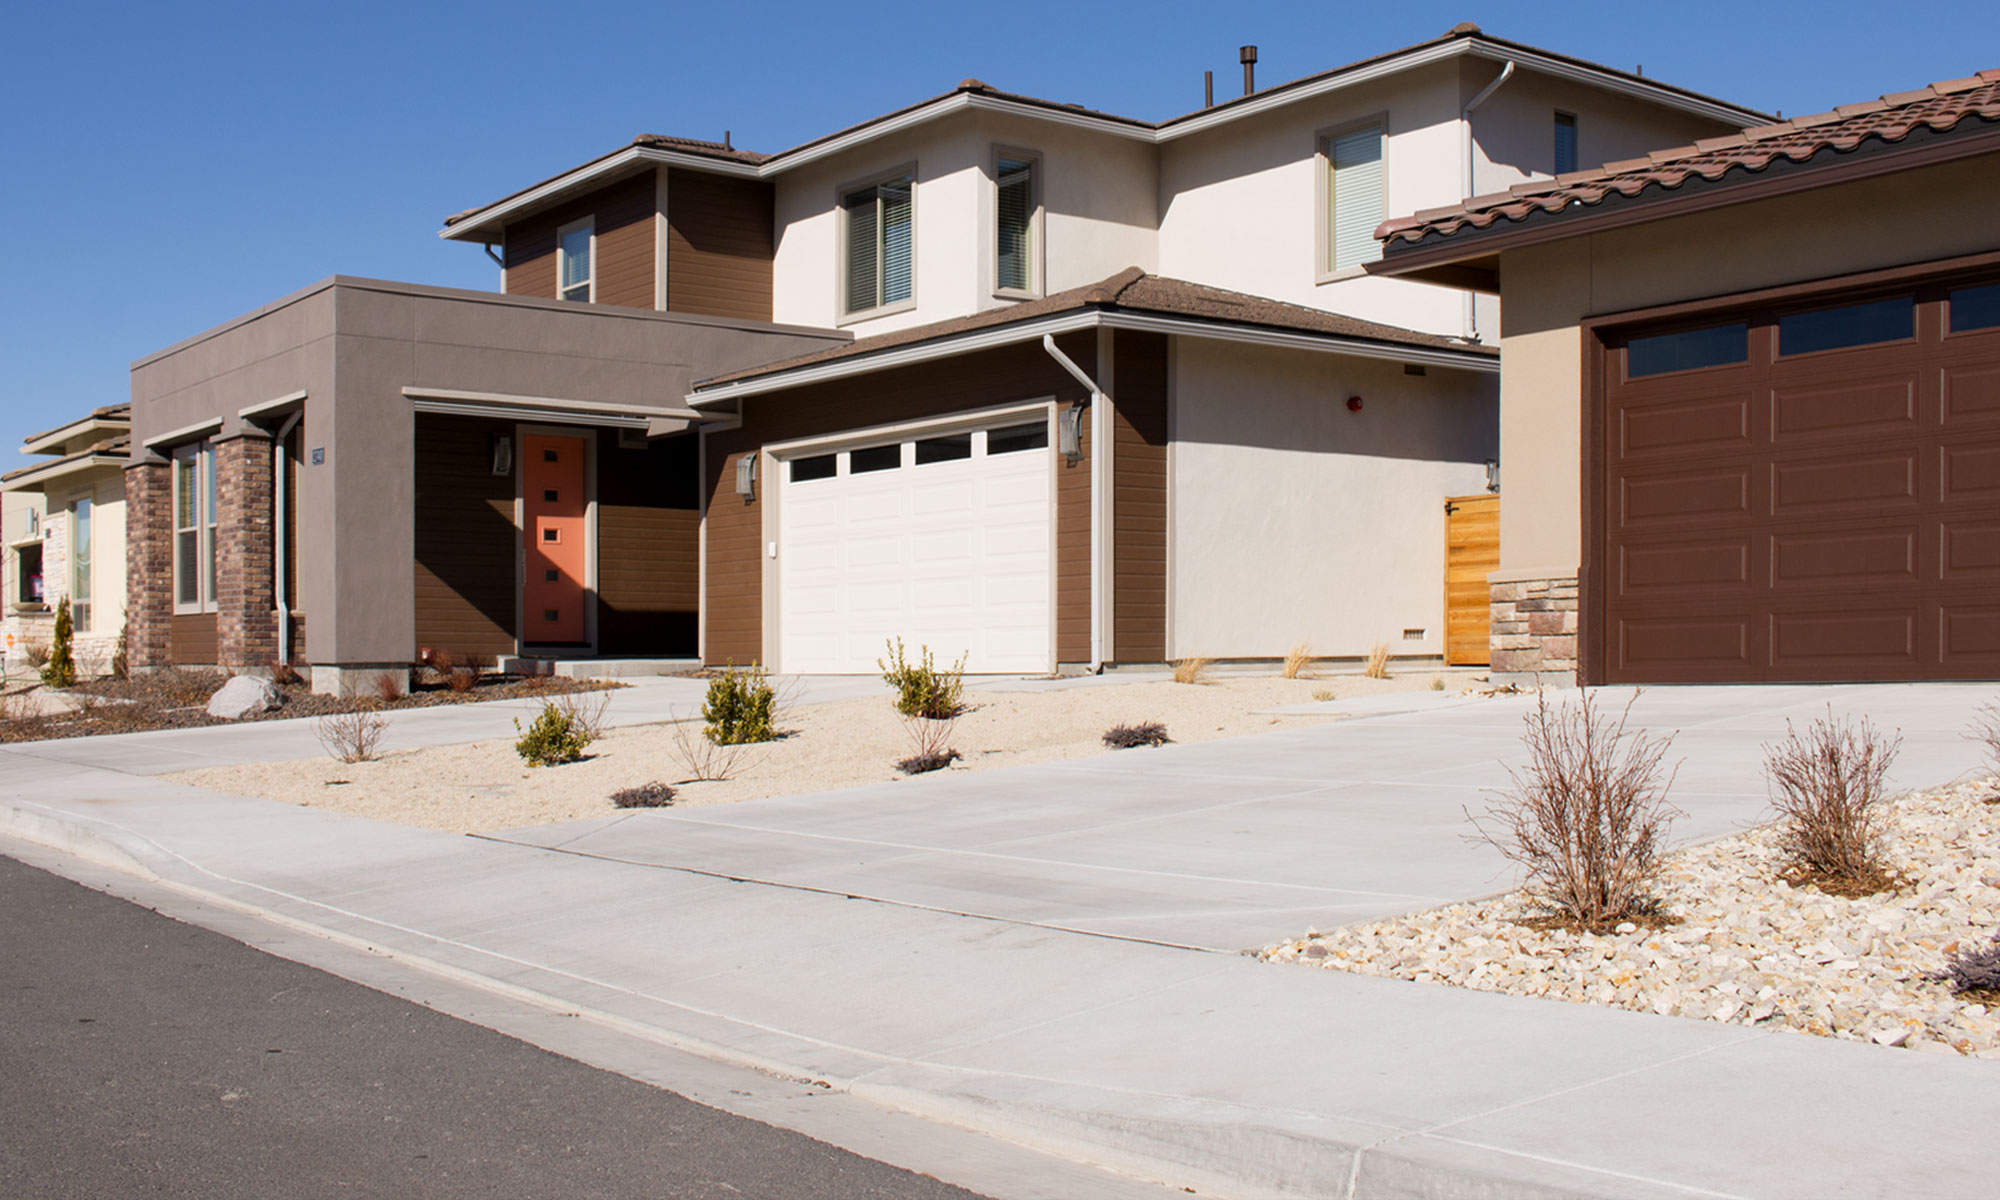 paint nv residential construction painting services exterior_development